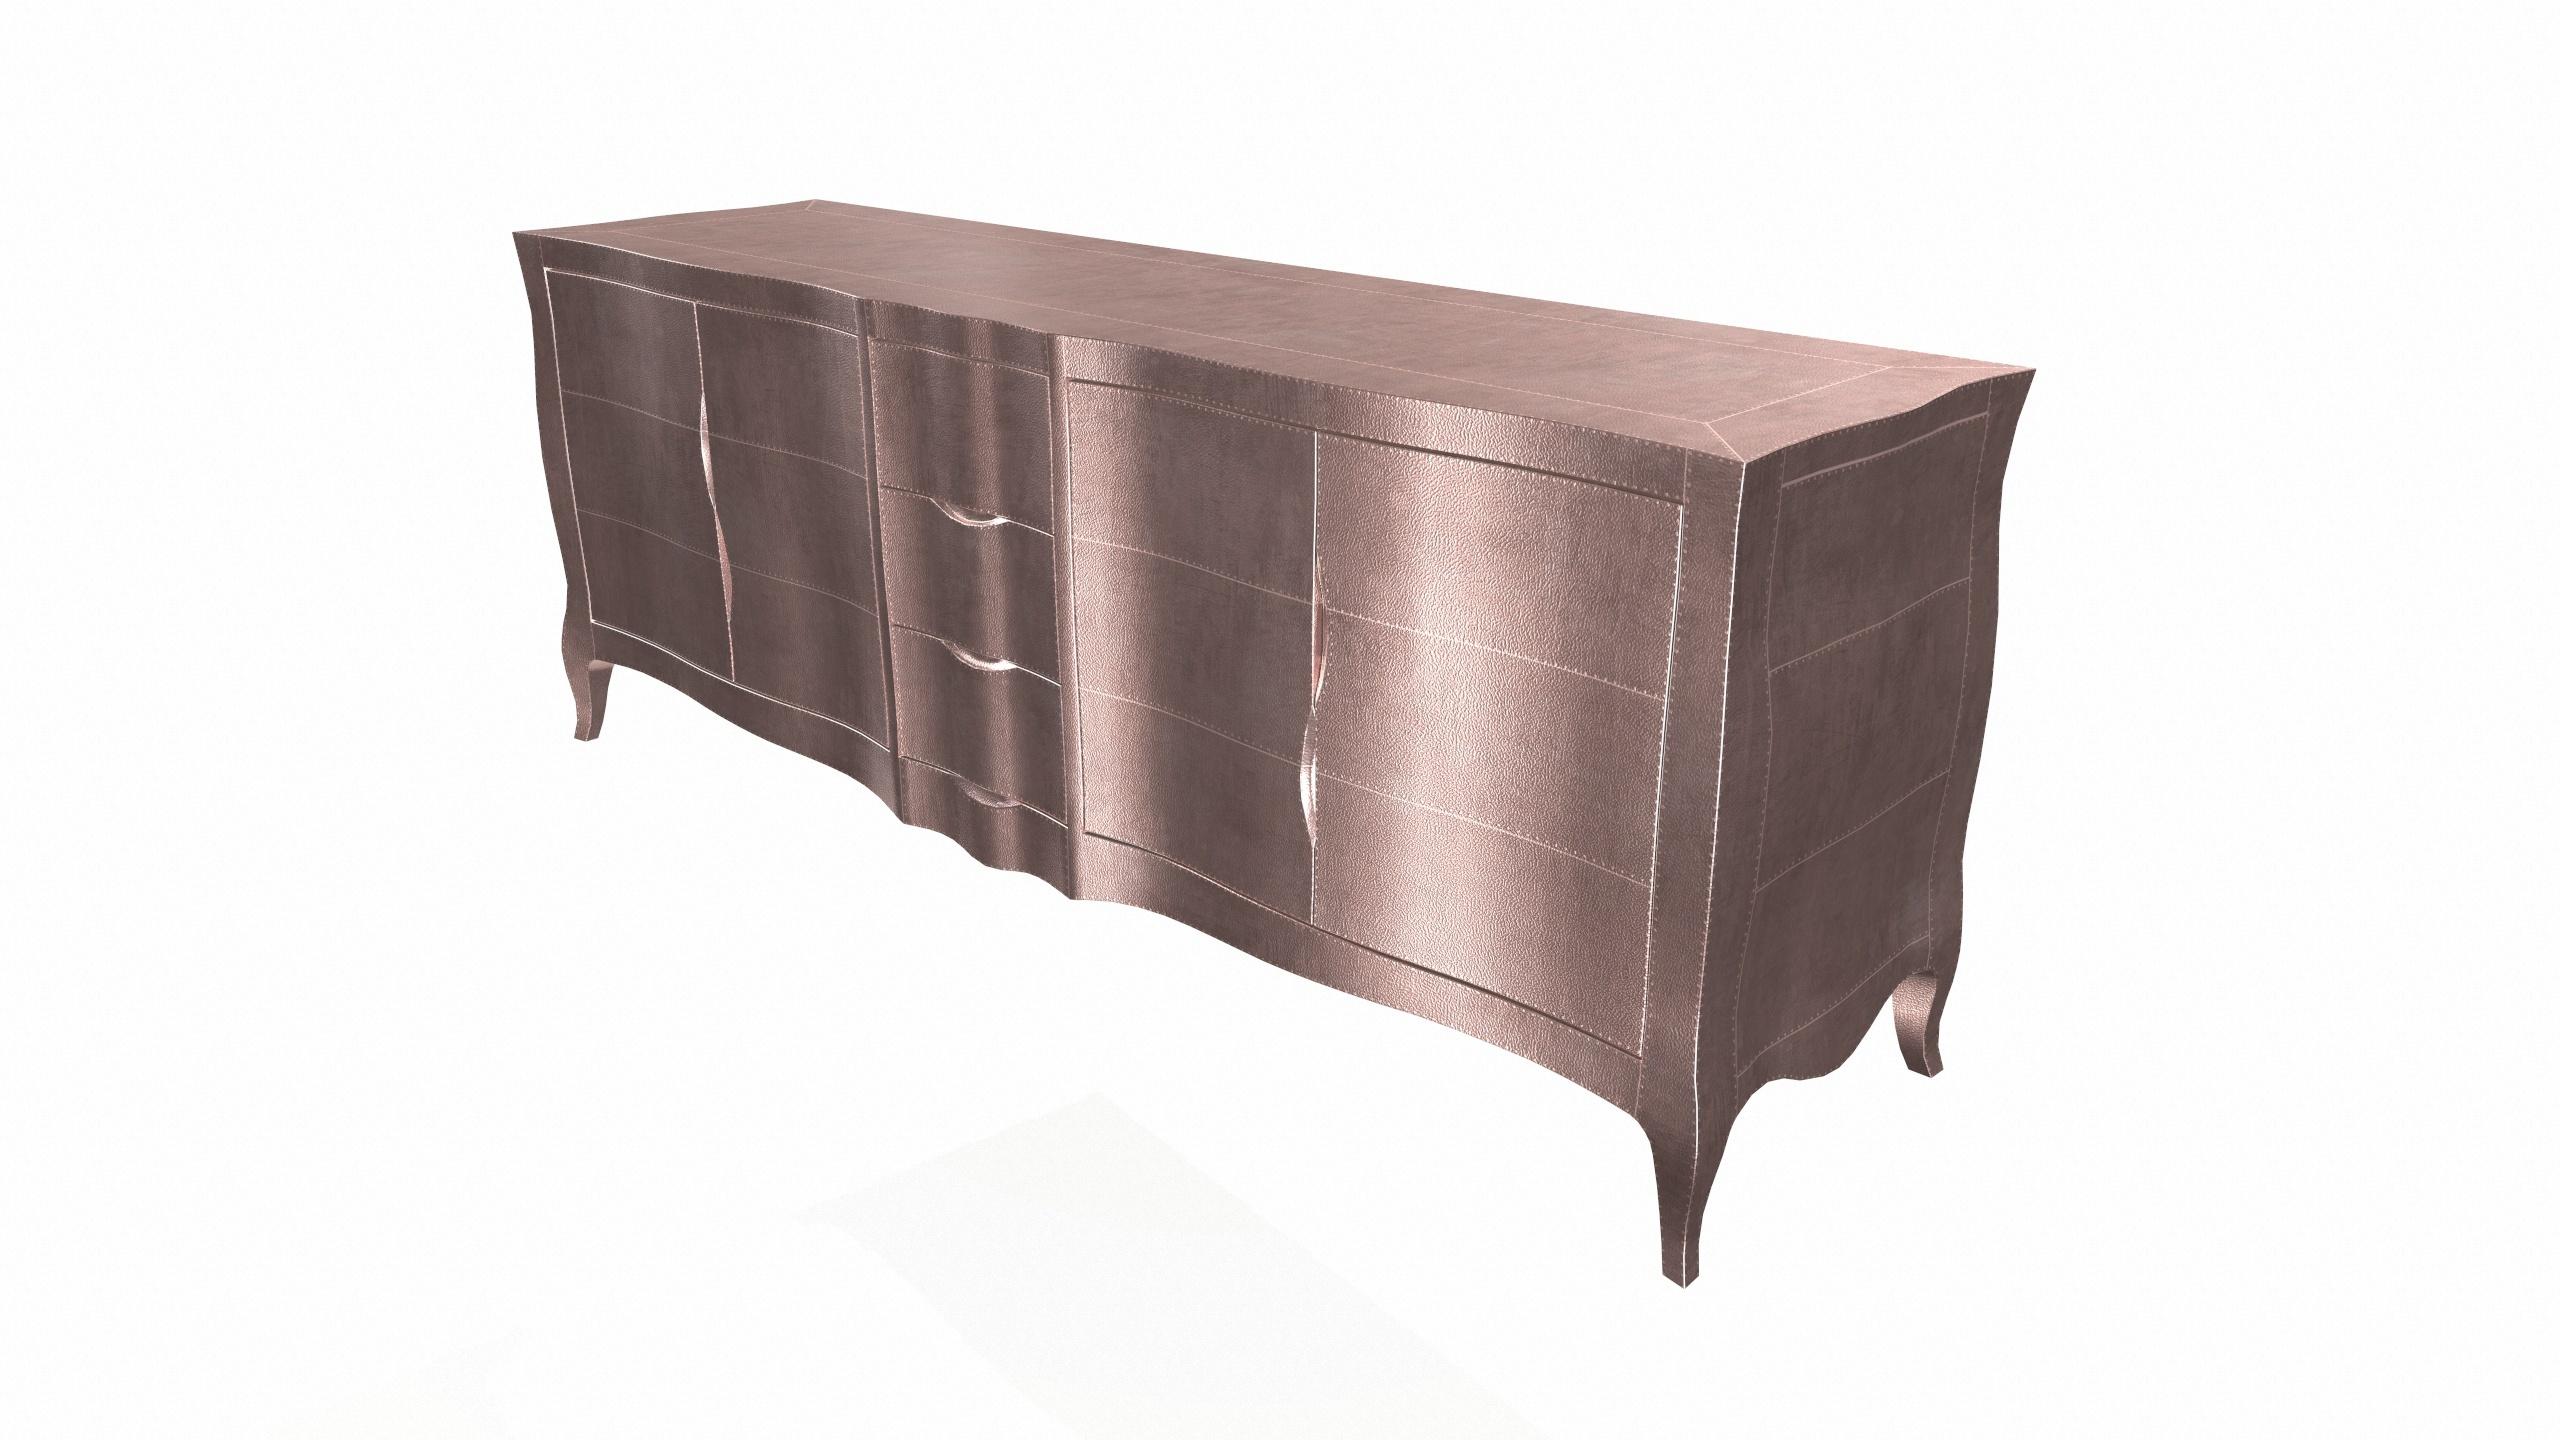 American Louise Credenza Art Deco Bookcases in Fine Hammered Copper by Paul Mathieu For Sale